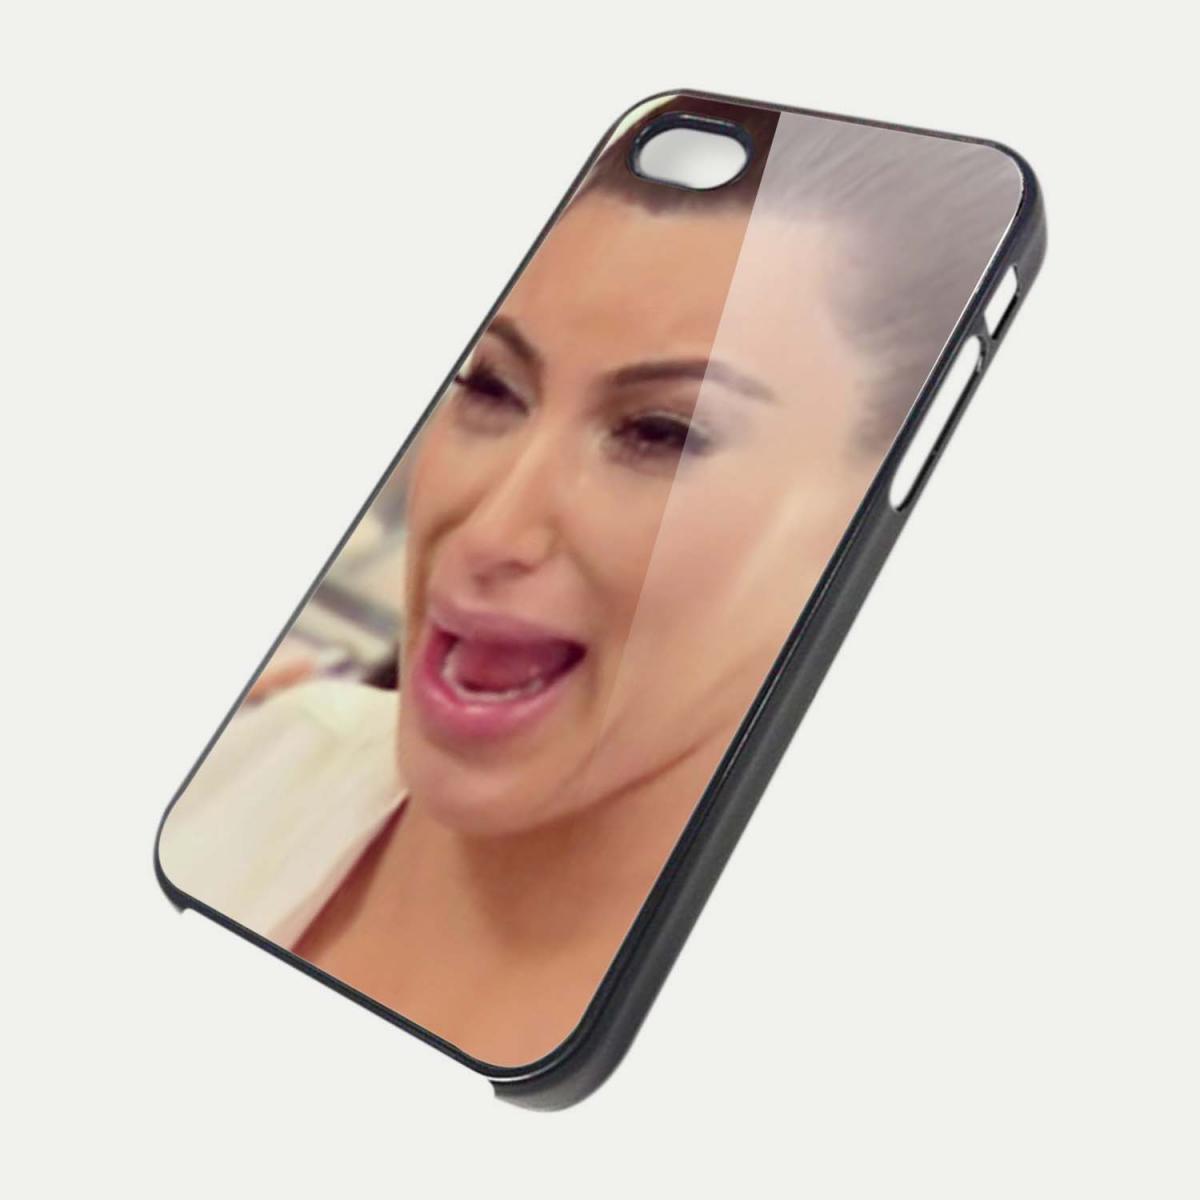 Kim Kardashian Crying Face Special Design Iphone 4 Case Cover